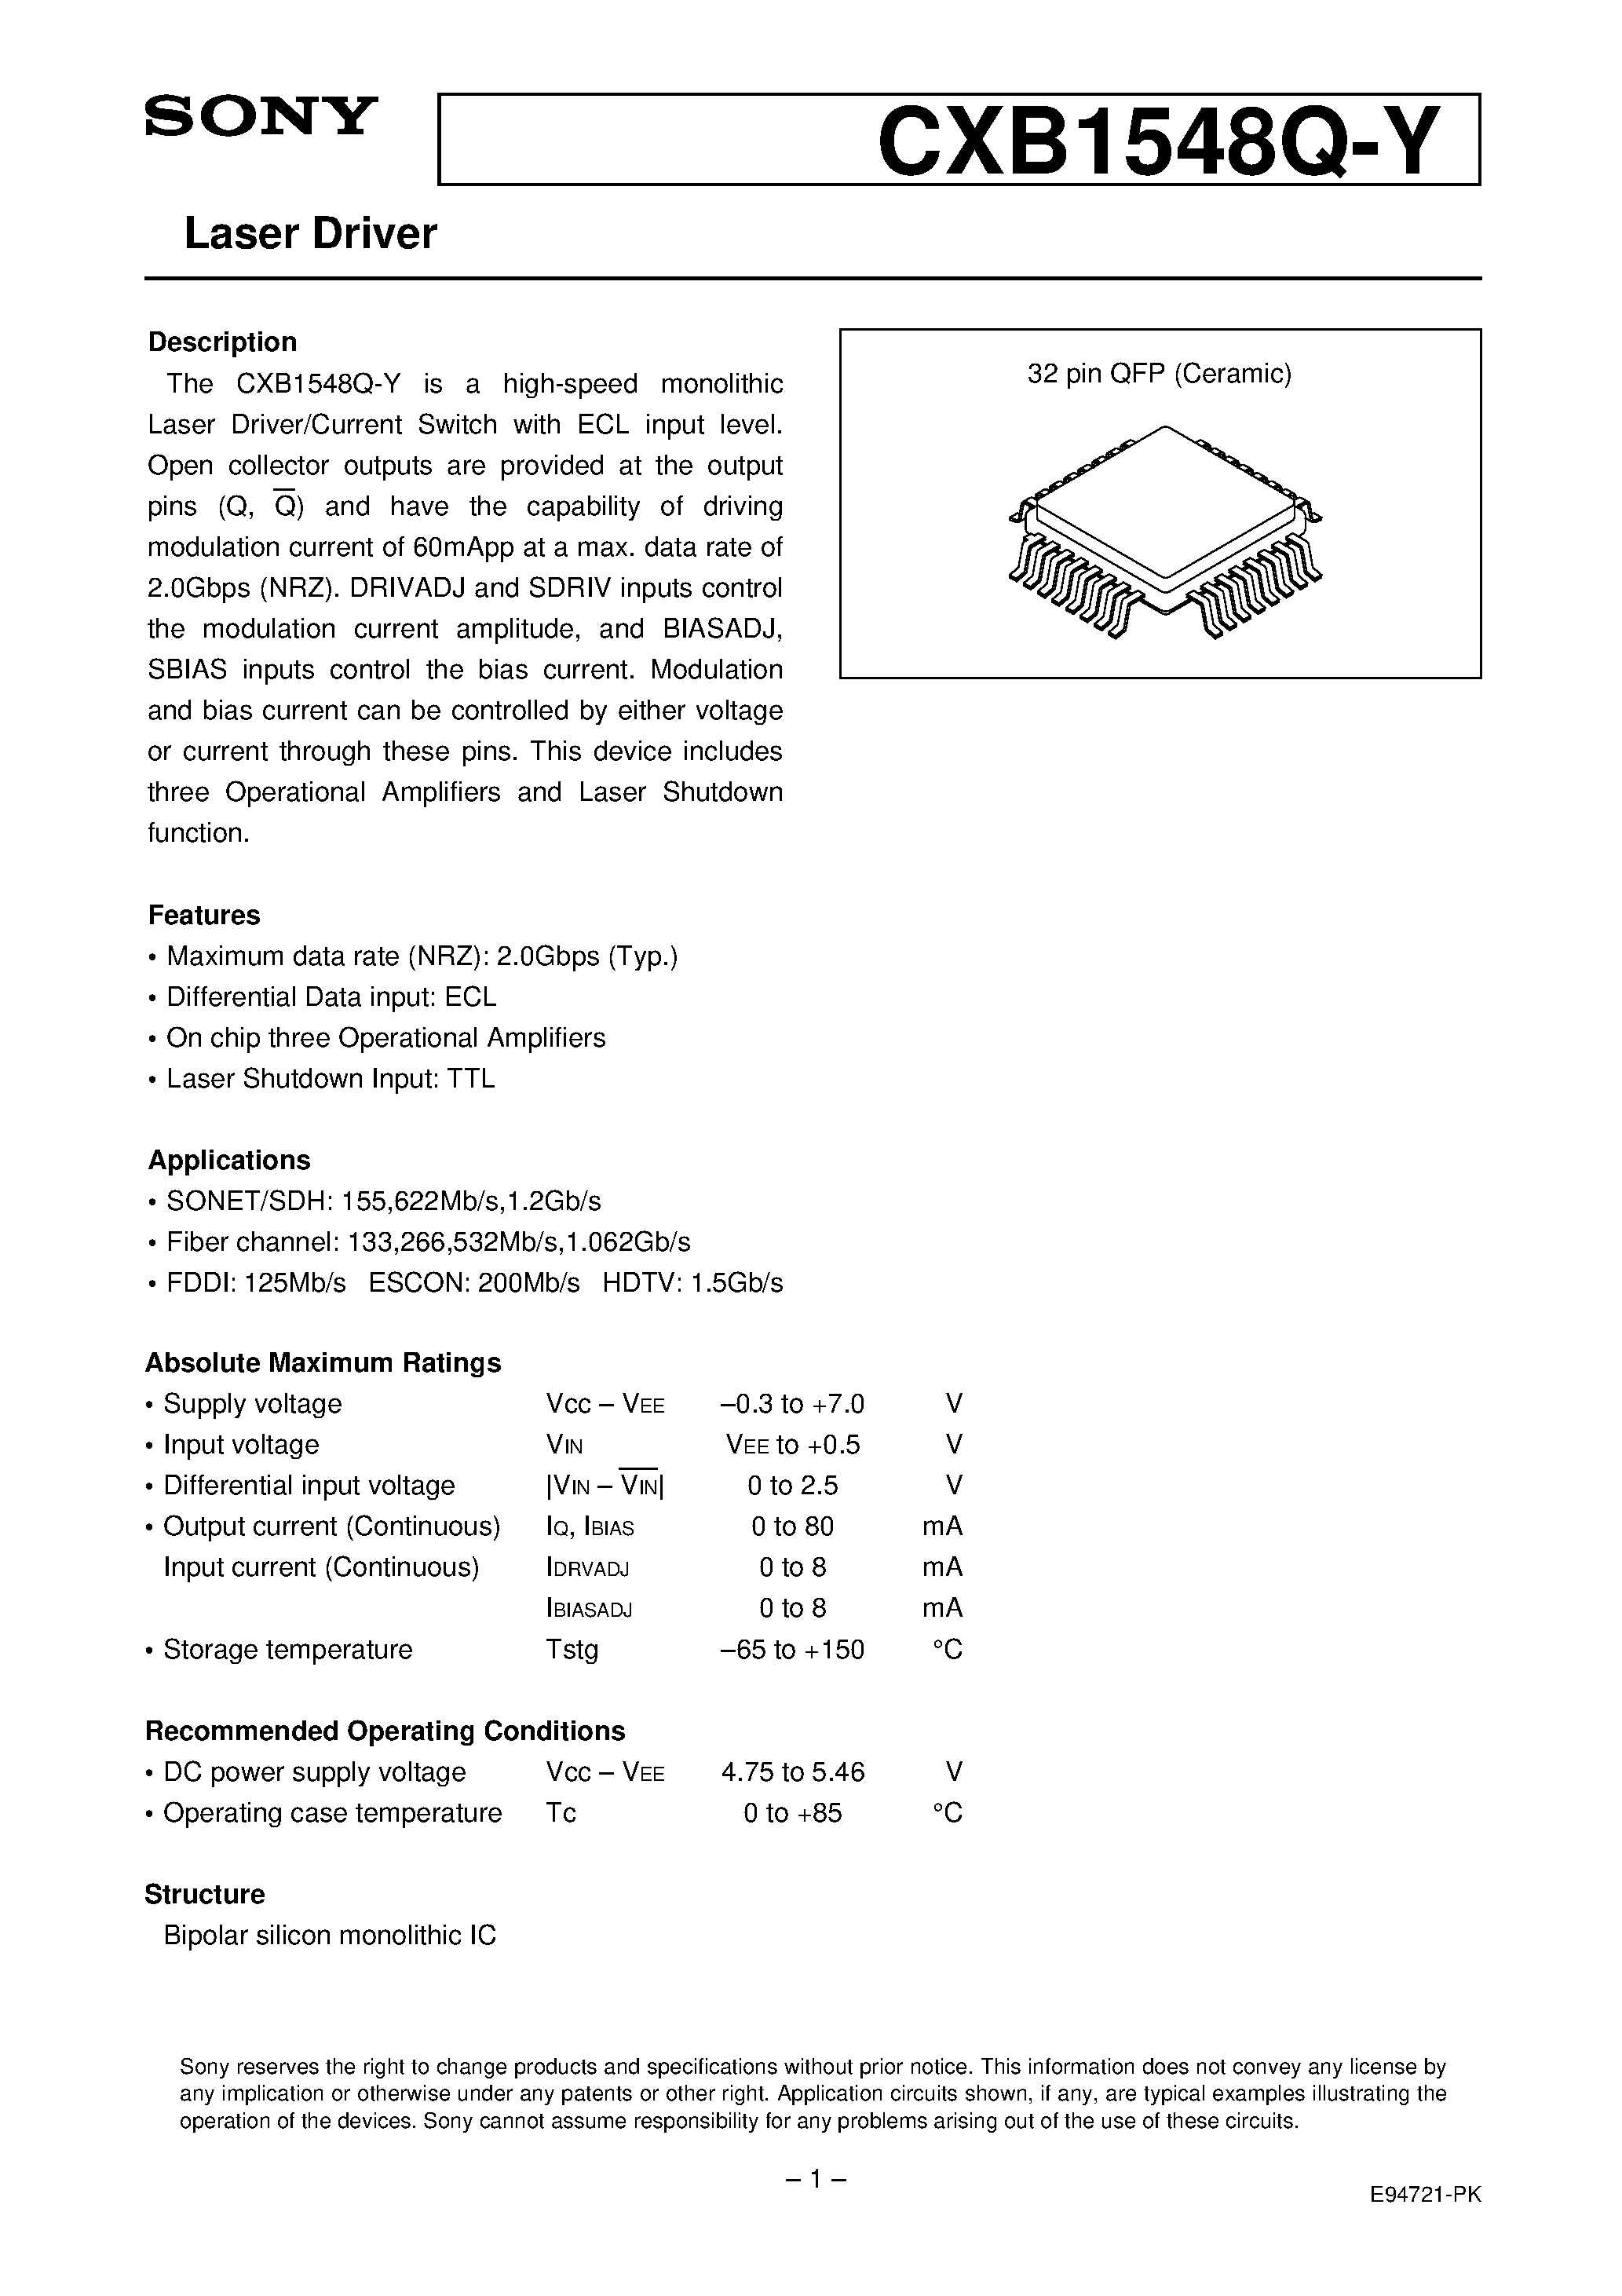 Datasheet CXB1548Q-Y - Laser Driver page 1